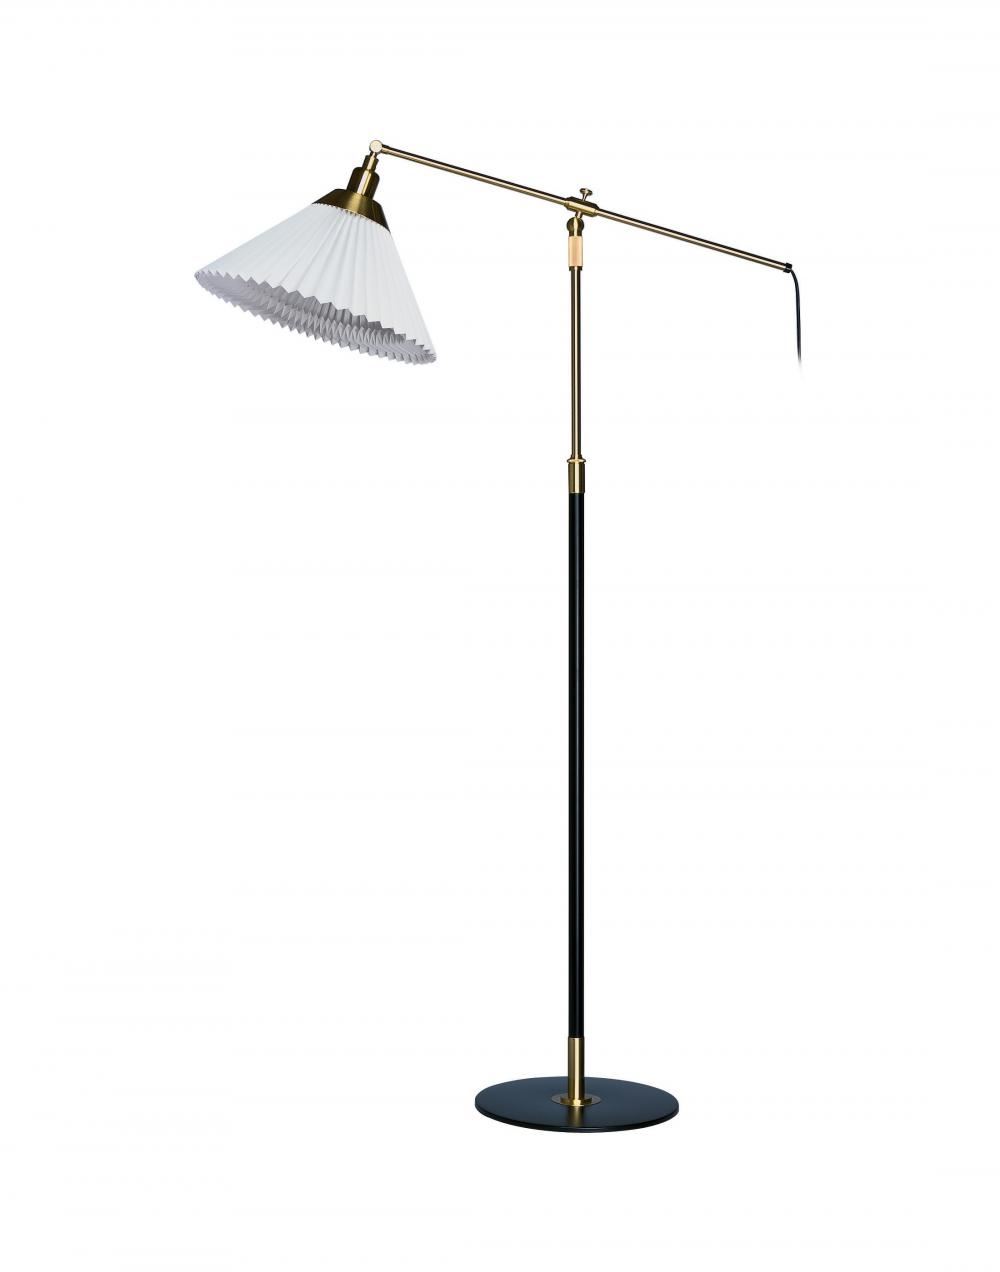 Le Klint 349 Floor Lamp 349 Floor Lamp Paper Extra Delivery Time Incurred